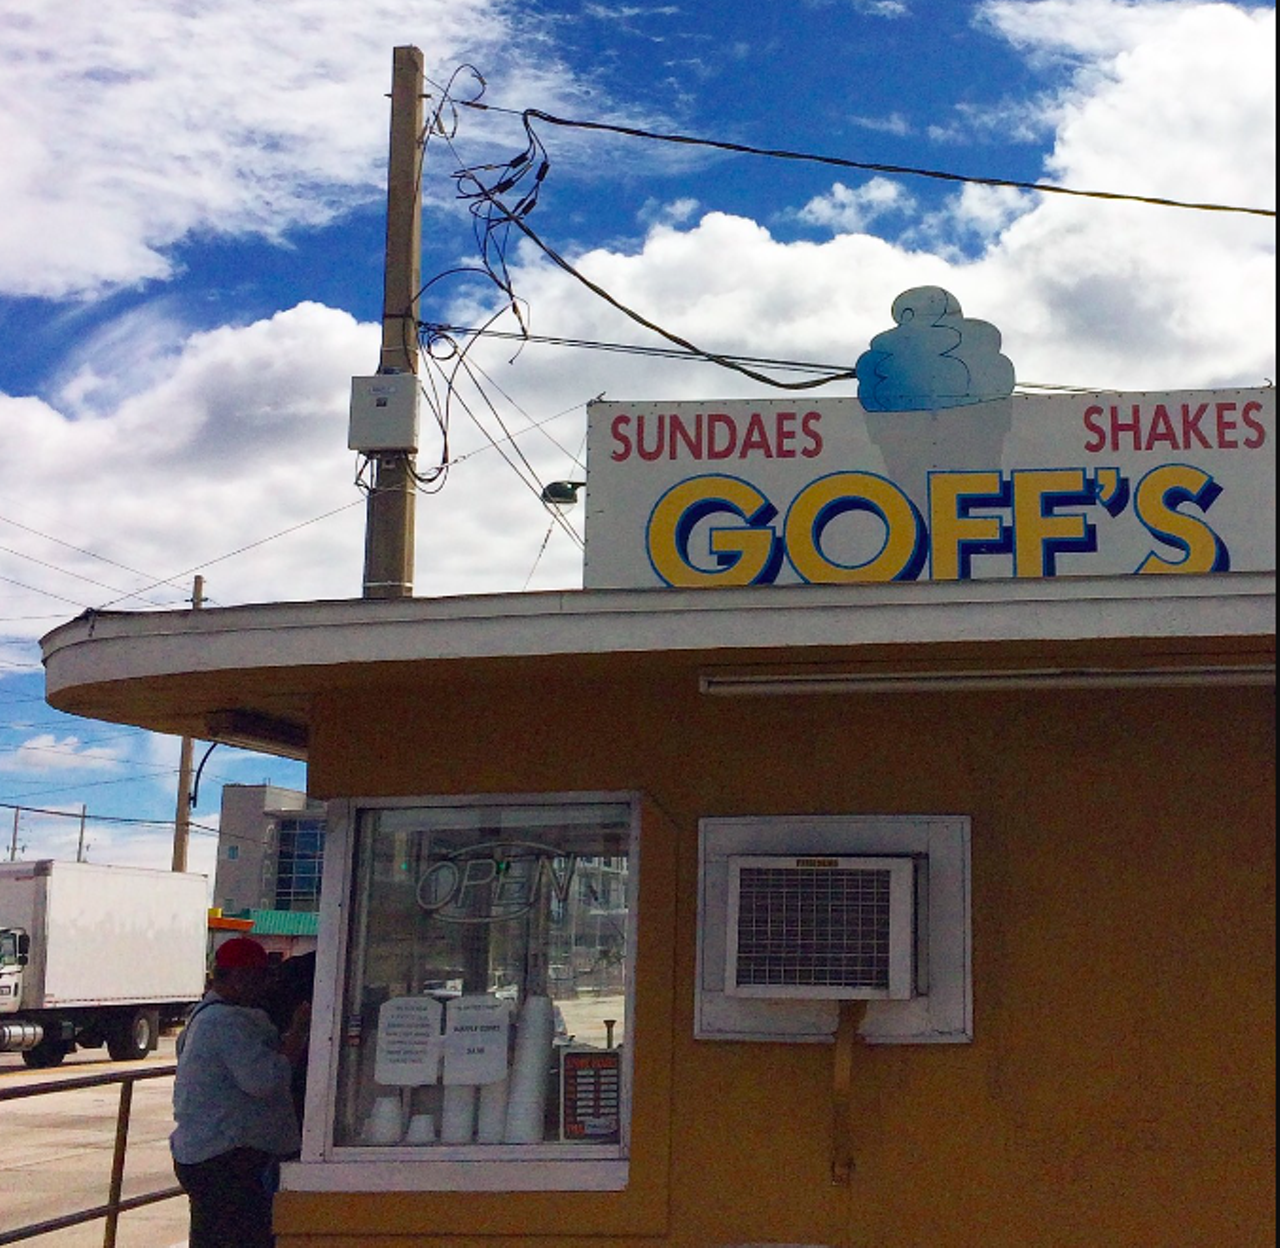 Goff's Drive-In
After 50 years, this iconic ice cream stand couldn't weather a uniquely terrible 2022.